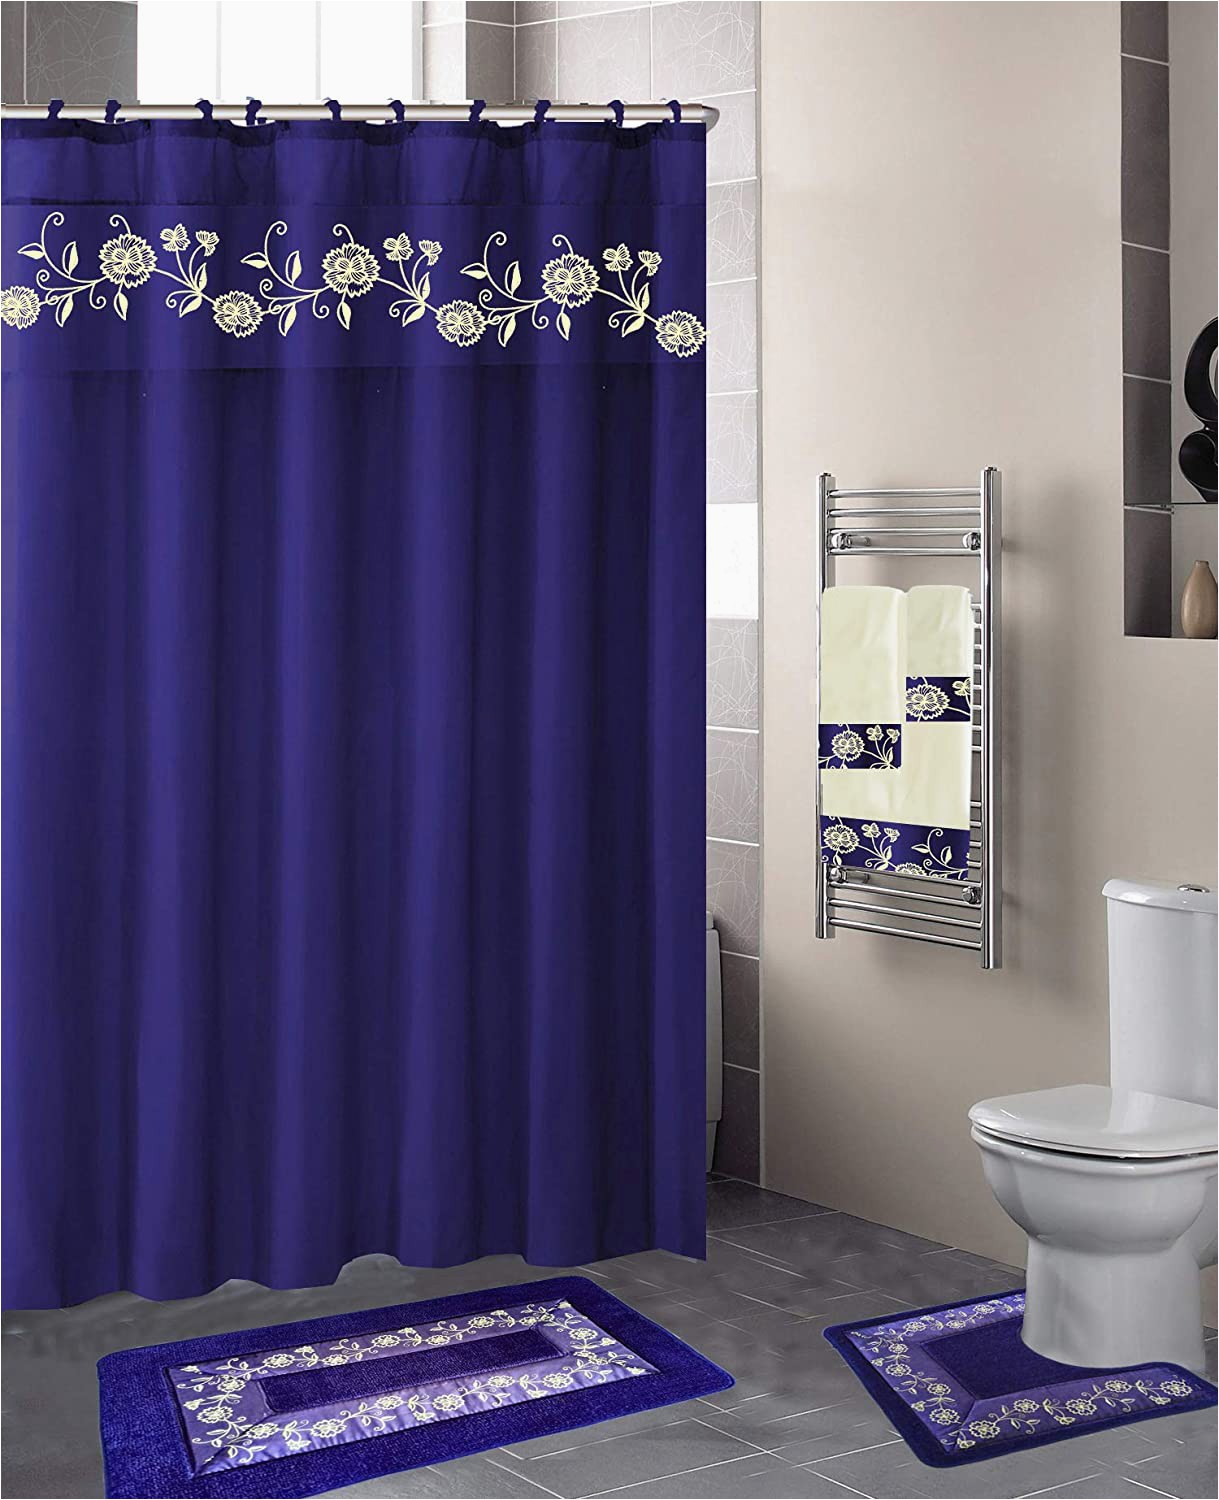 Bath Curtain and Rug Set Luxury Home Collection 18 Pc Bath Rug Set Embroidery Non Slip Bathroom Rug Mats and Rug Contour and Shower Curtain and towels and Rings Hooks and